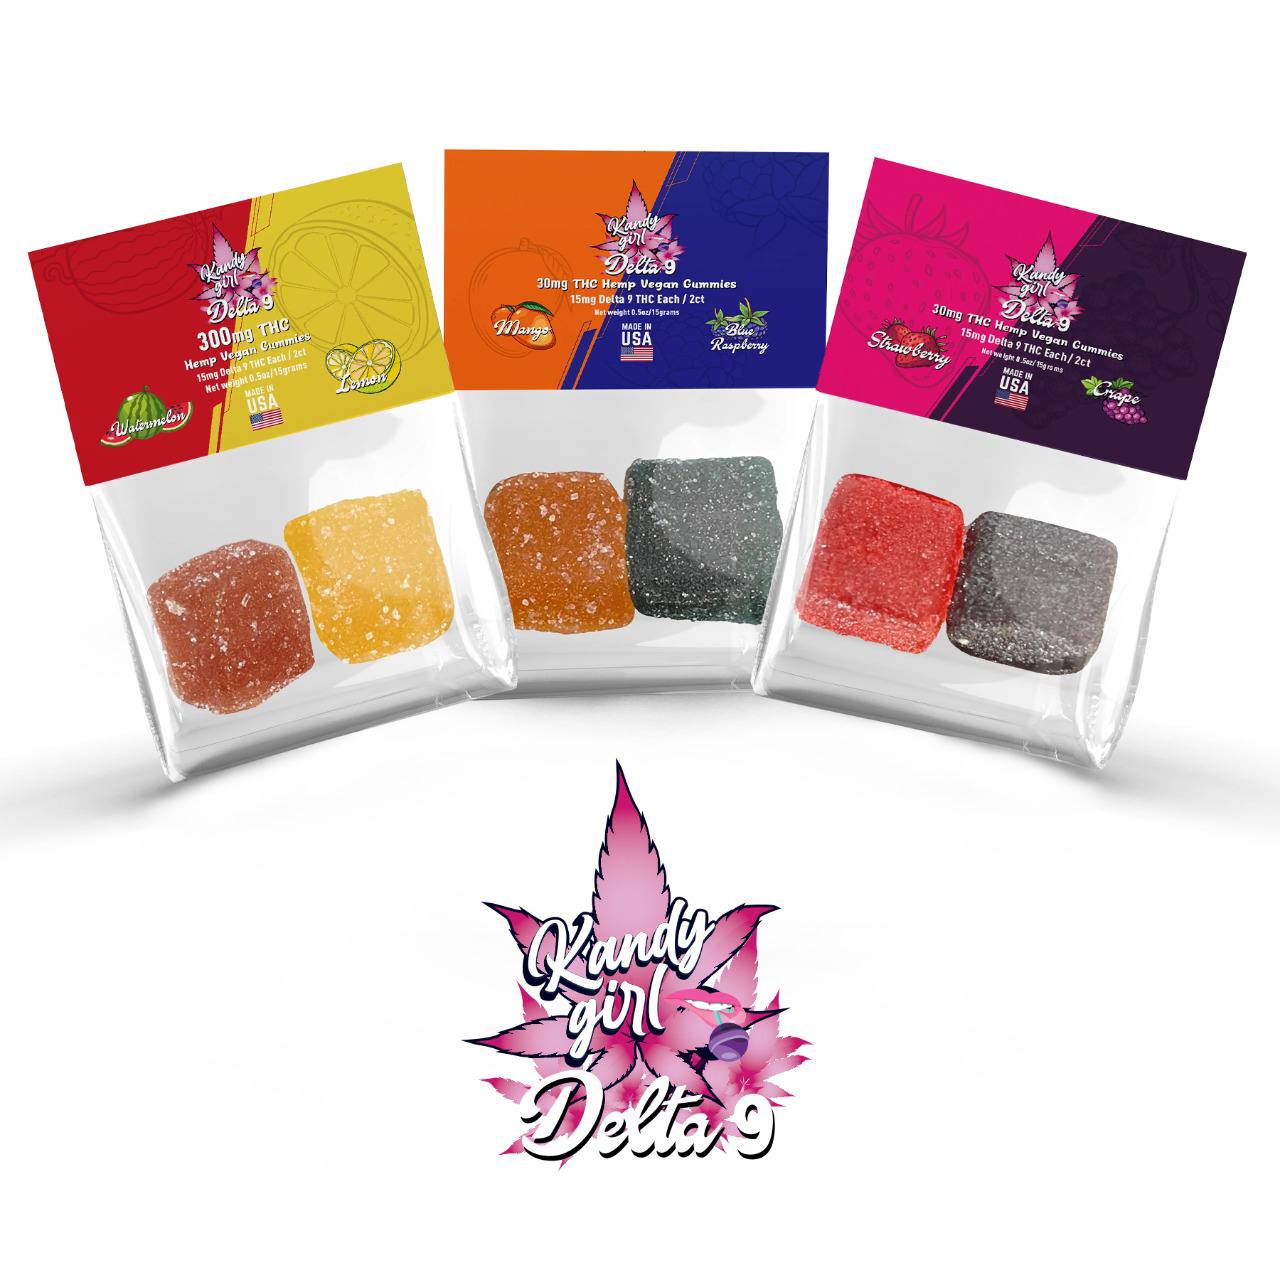 Free Kandy Girl Delta-8 Prerolls or Delta-9 Gummies Samples with Free Shipping